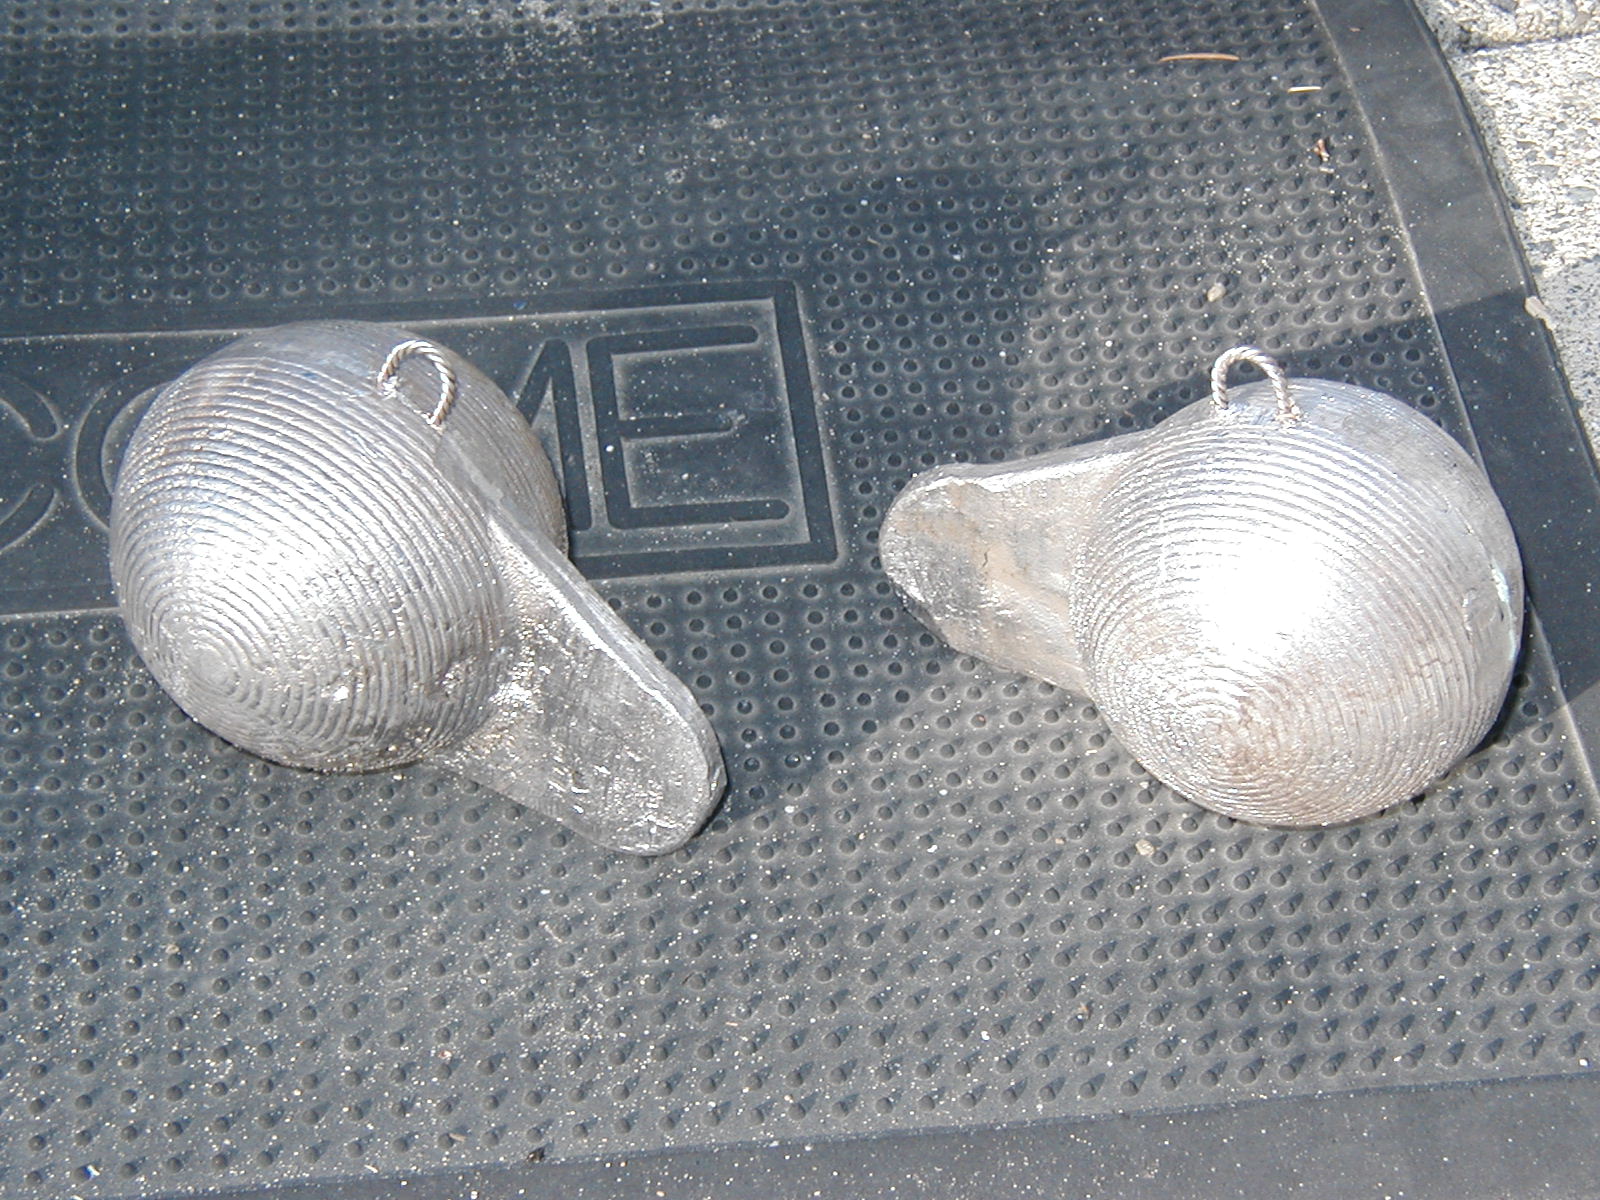 Casting Lead Down-rigger Balls in a Wooden Mold